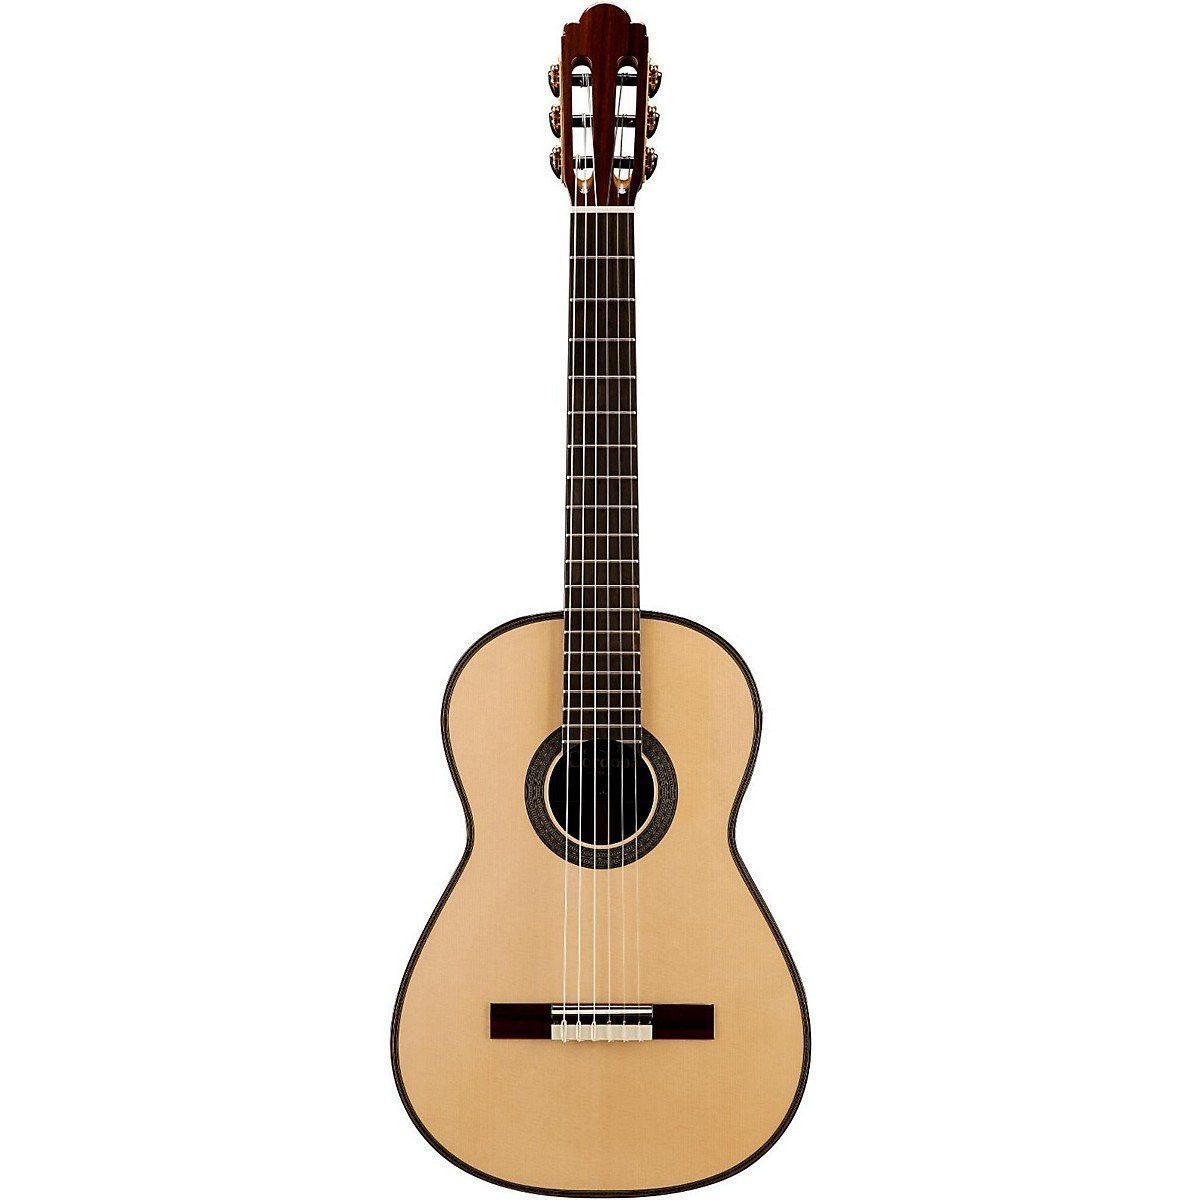 Cordoba Master Series - Torres - Solid Spruce Top  - Solid Indian Rosewood Back/Sides - Handmade in USA